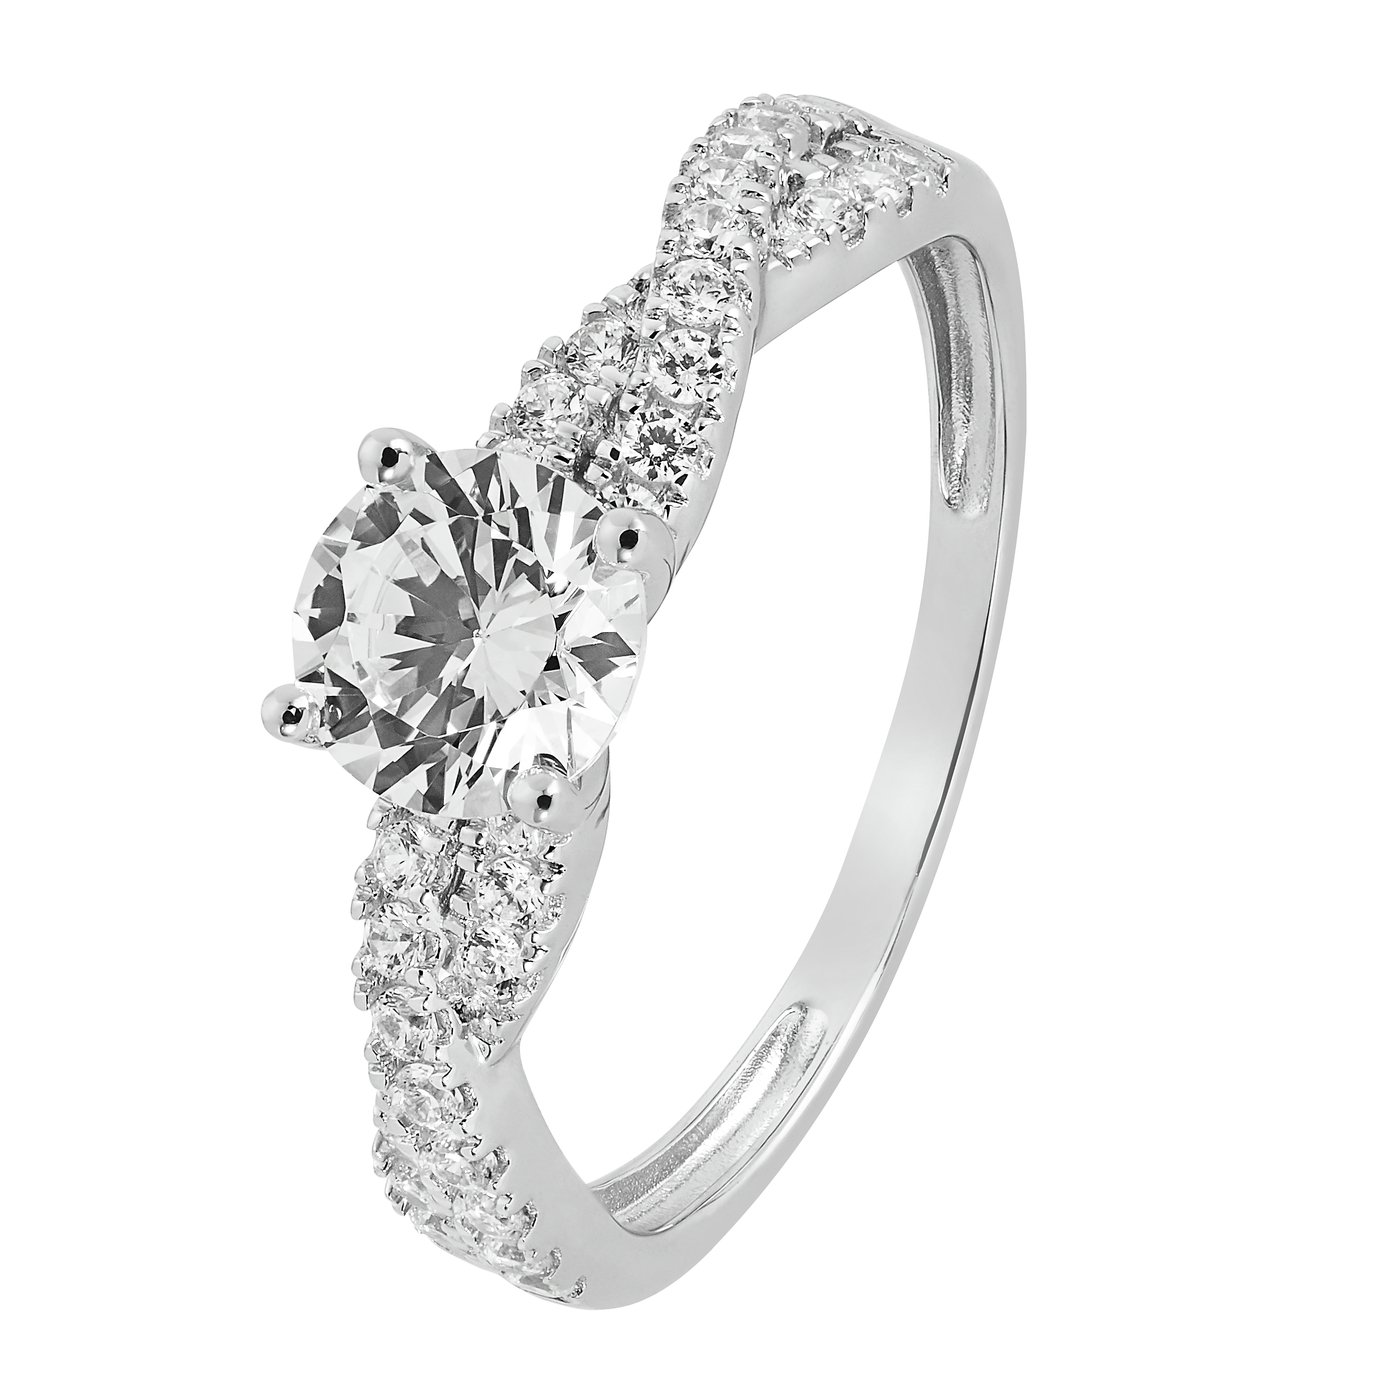 Revere 9ct White Gold Cubic Zirconia Engagement Ring - H